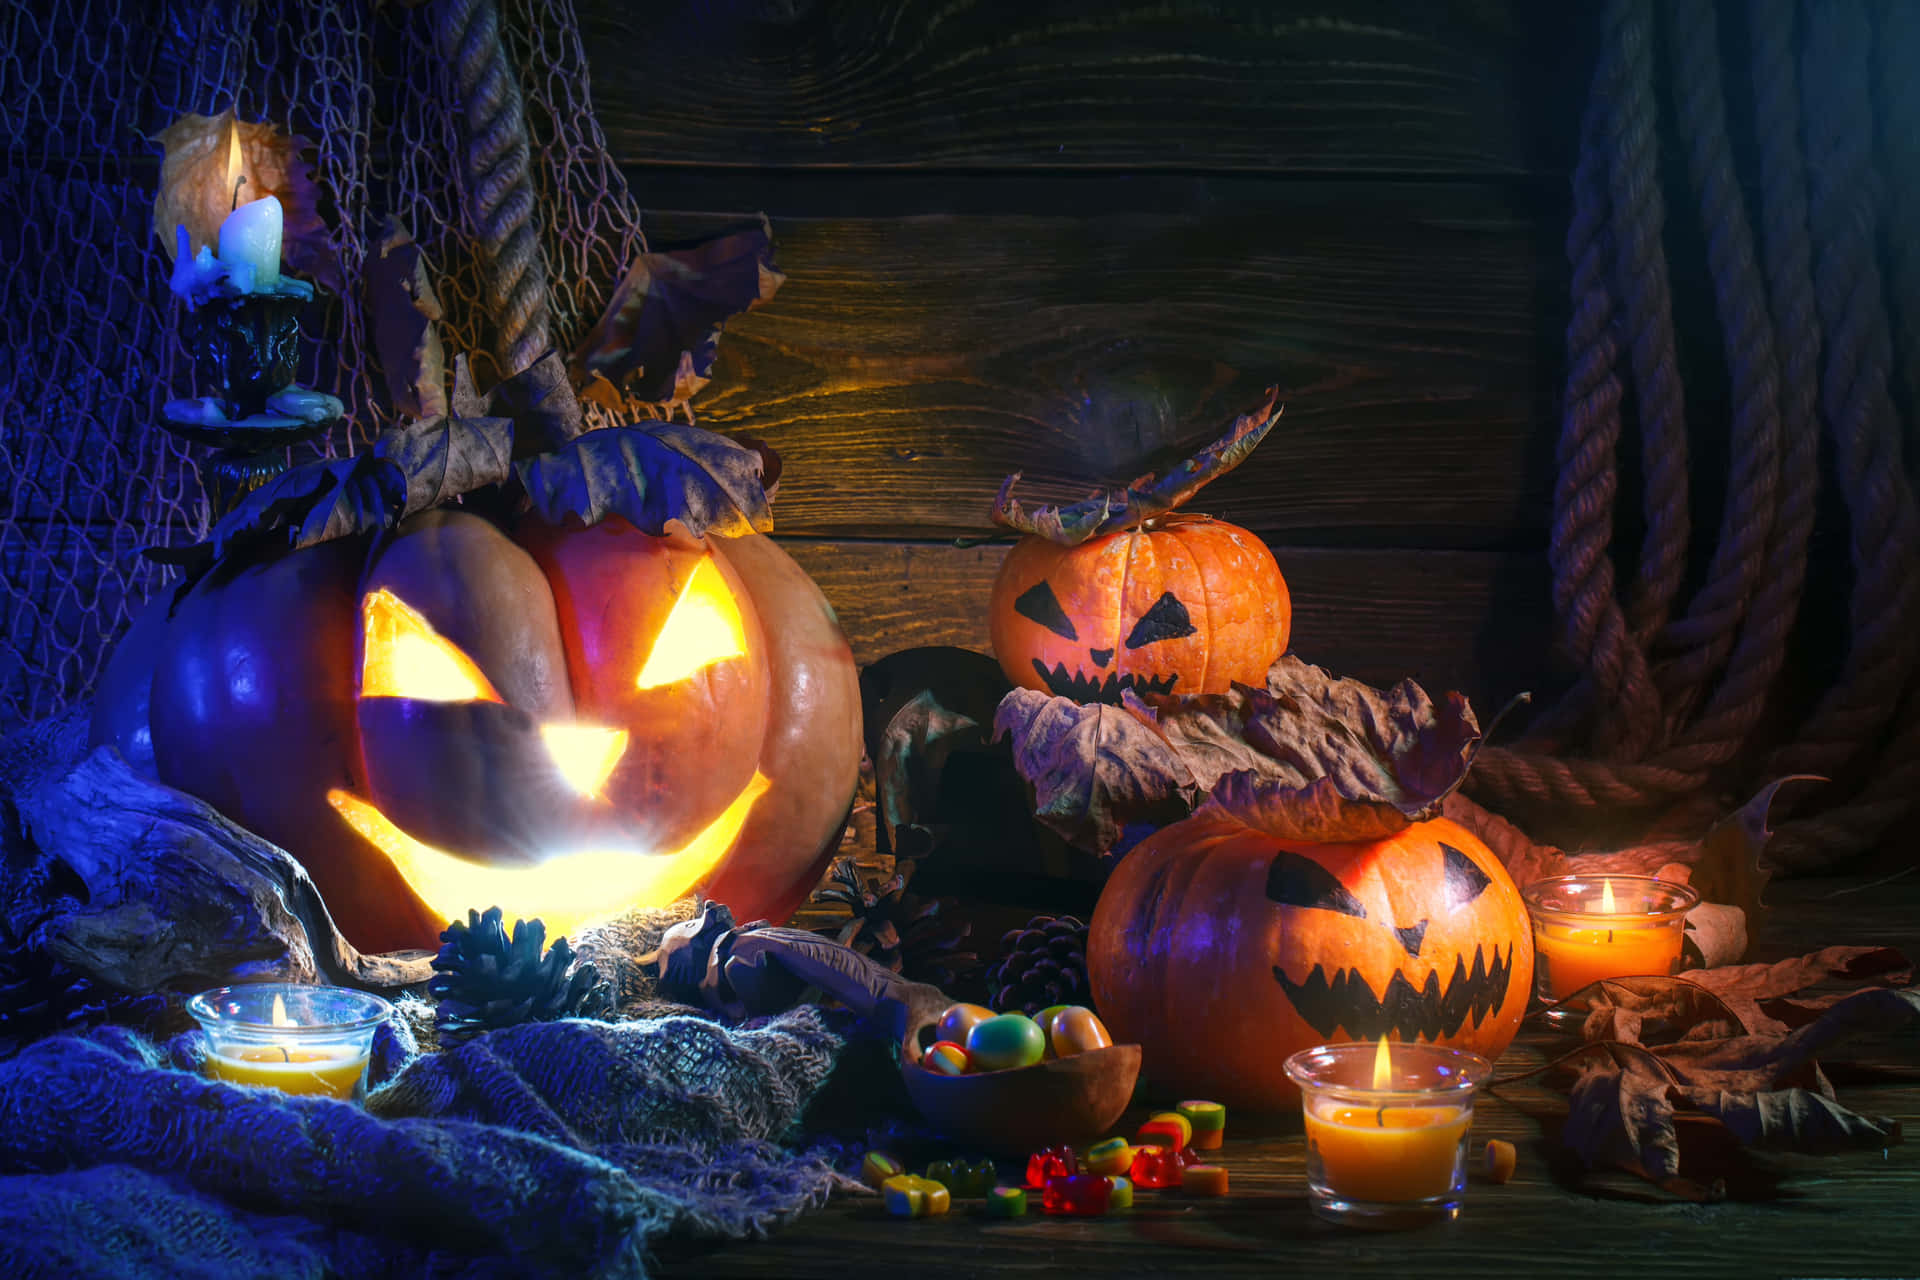 Add a spooky glow to your Halloween festivities with these candle decorations! Wallpaper